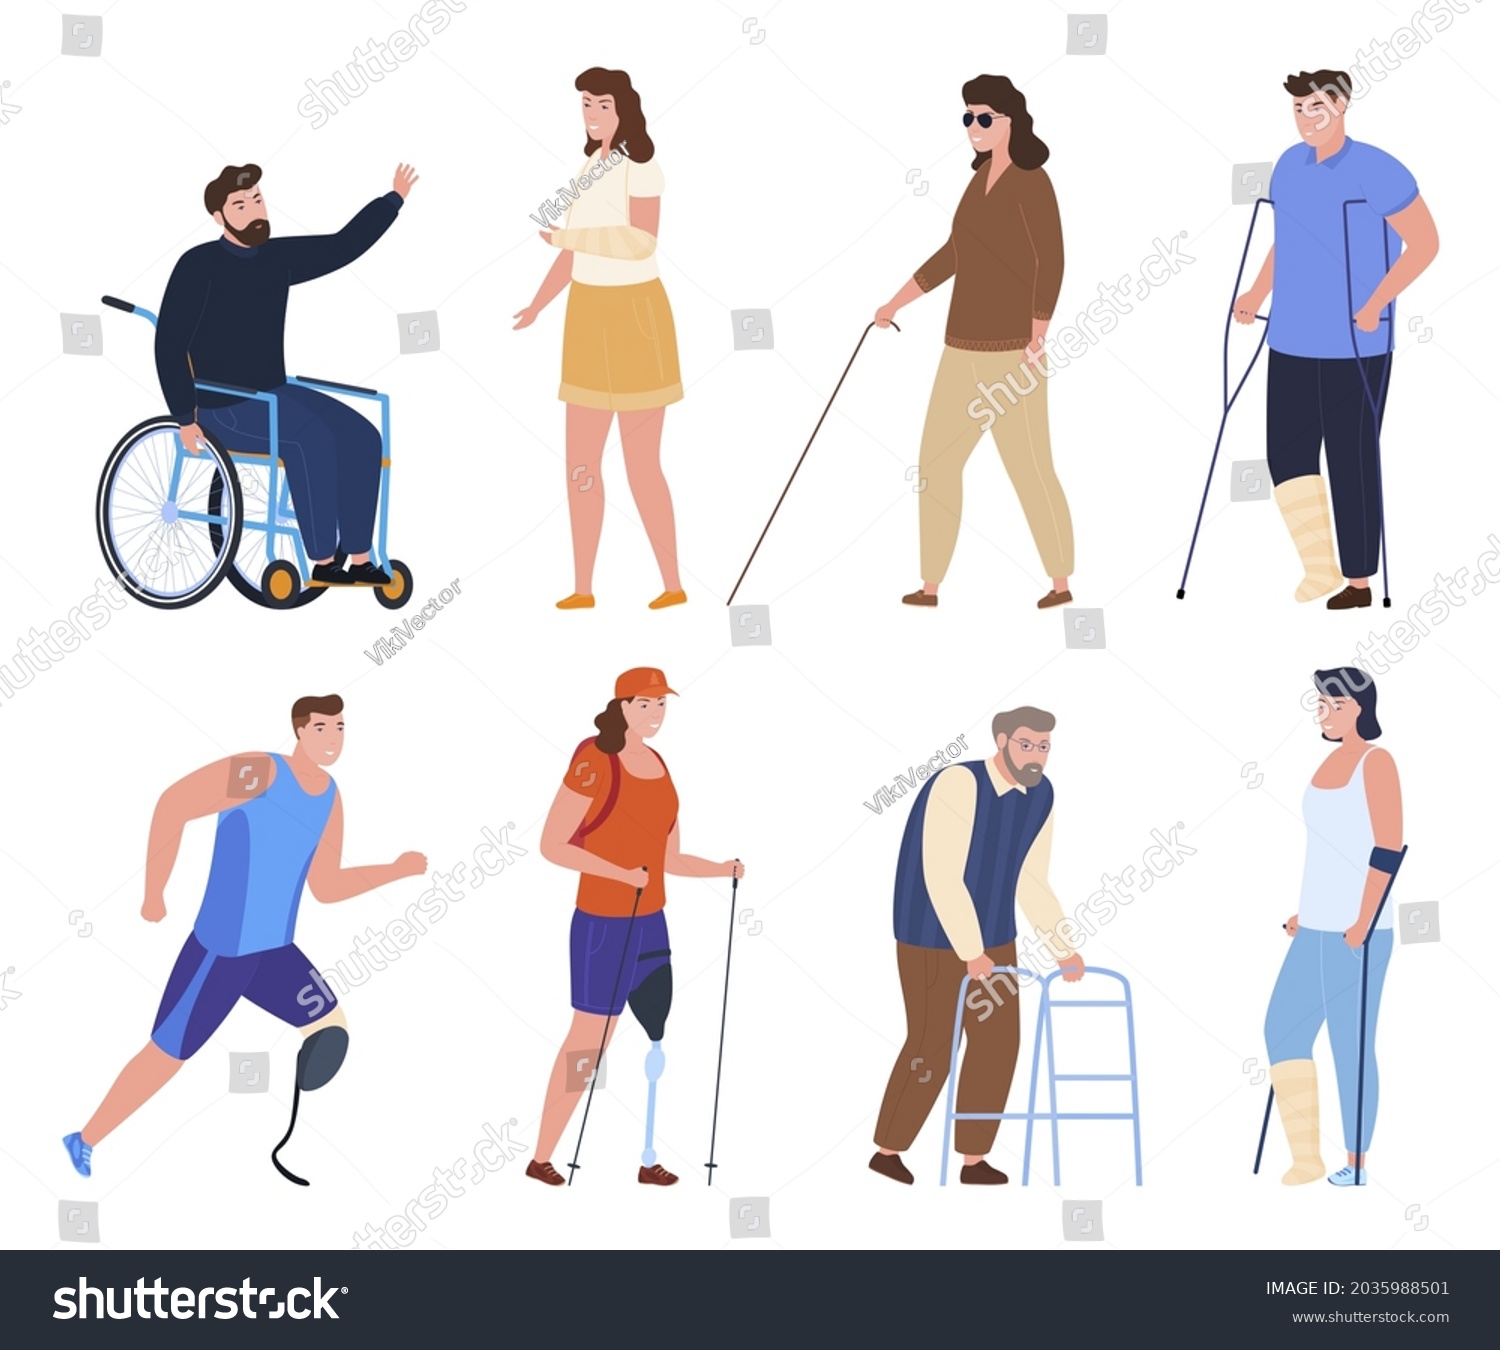 SVG of Collection of people with disabilities vector flat illustration. Set of man and woman suffering various physical injury and aging disease isolated. Handicapped person on wheelchair, crutch and cast svg